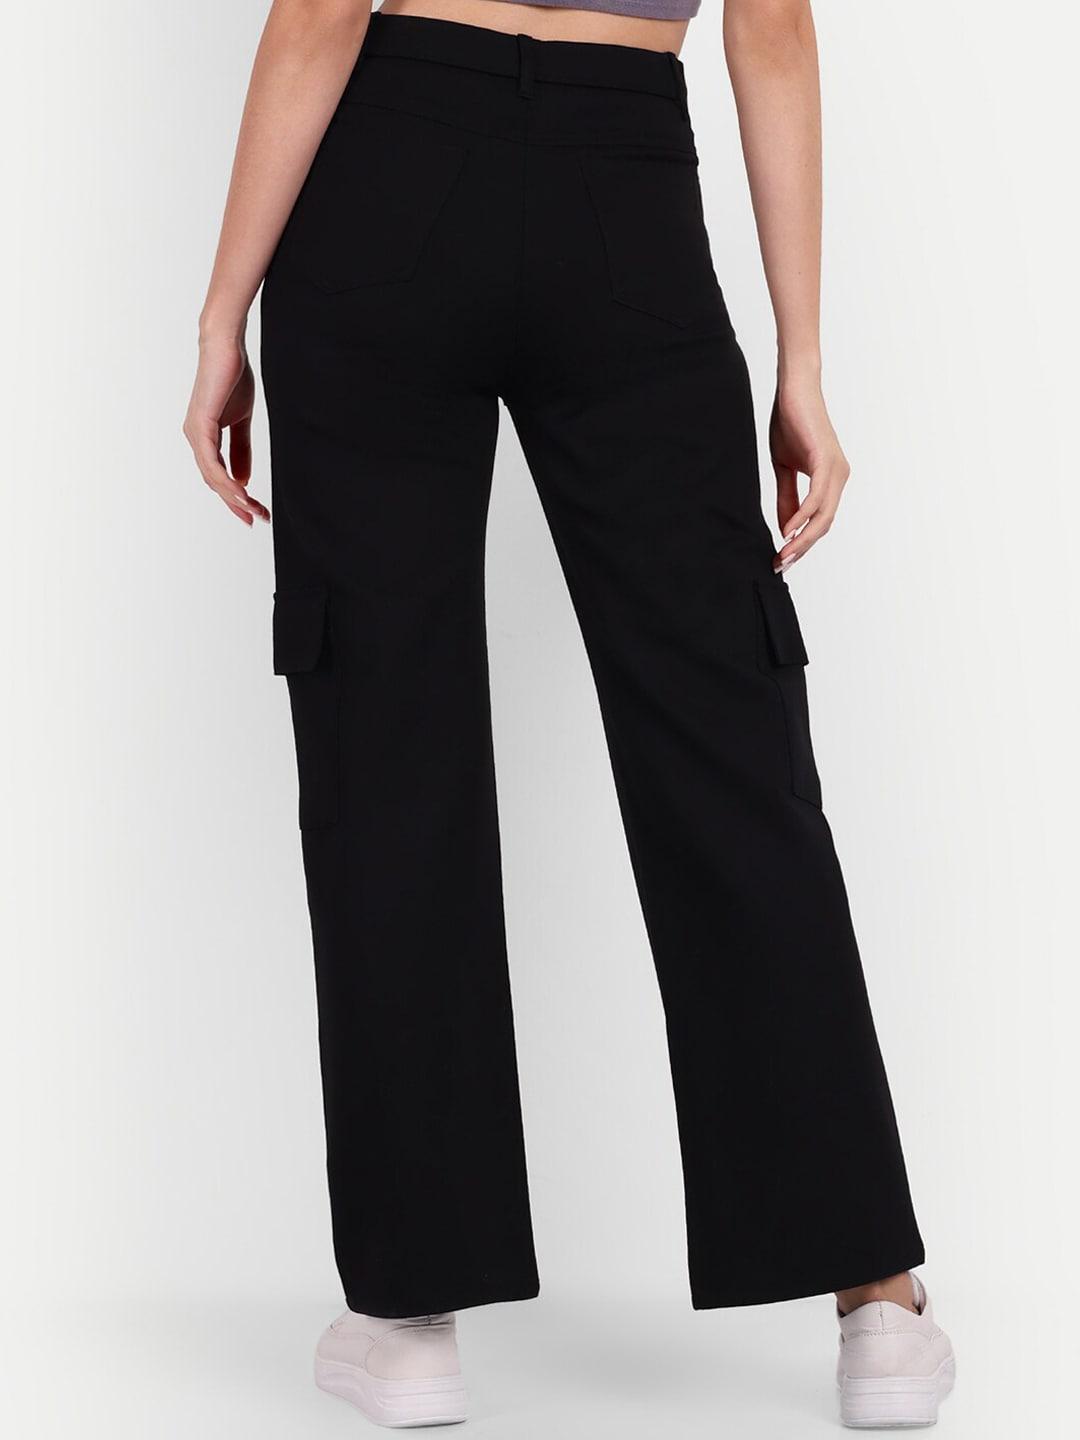 next-one-women-black-smart-high-rise-easy-wash-trousers